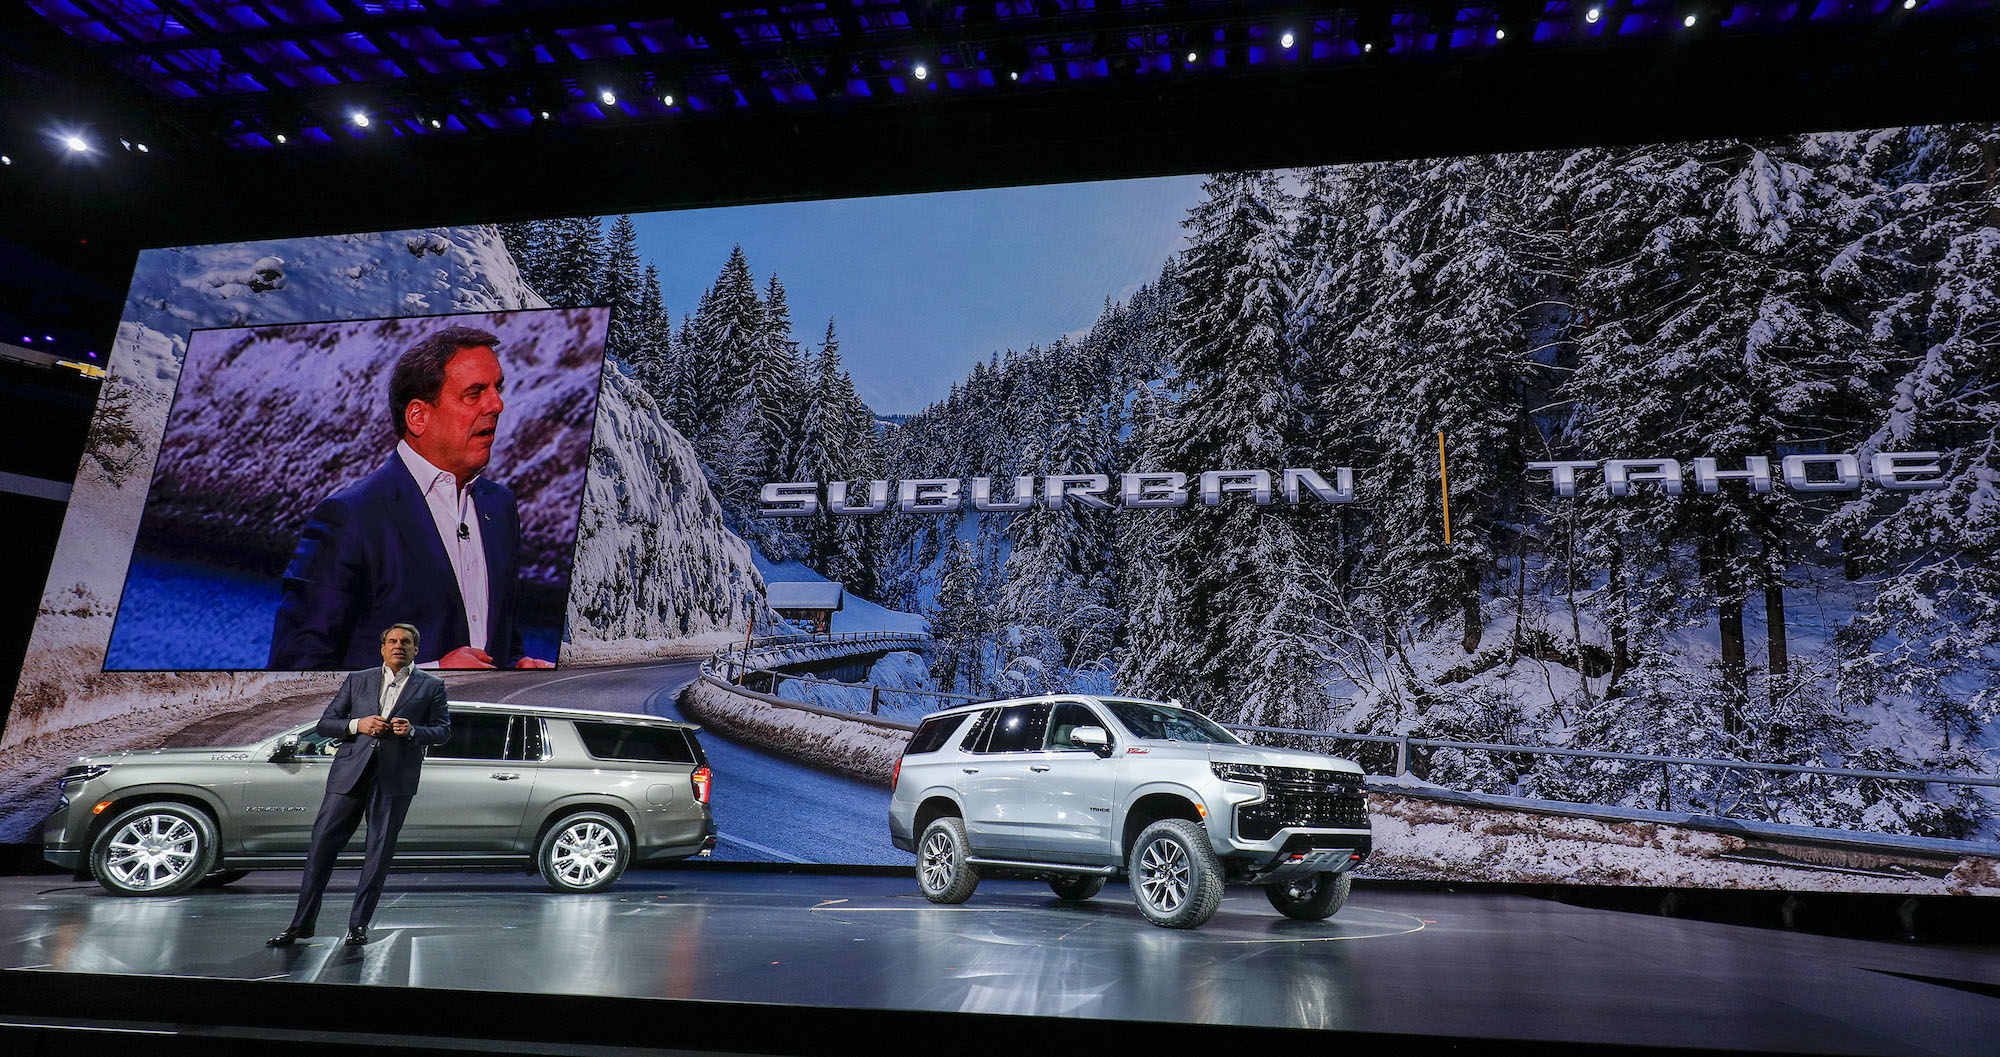 The new 2021 Chevrolet Suburban (left) and 2021 Tahoe (right) SUVs at their reveal at Little Caesars Arena